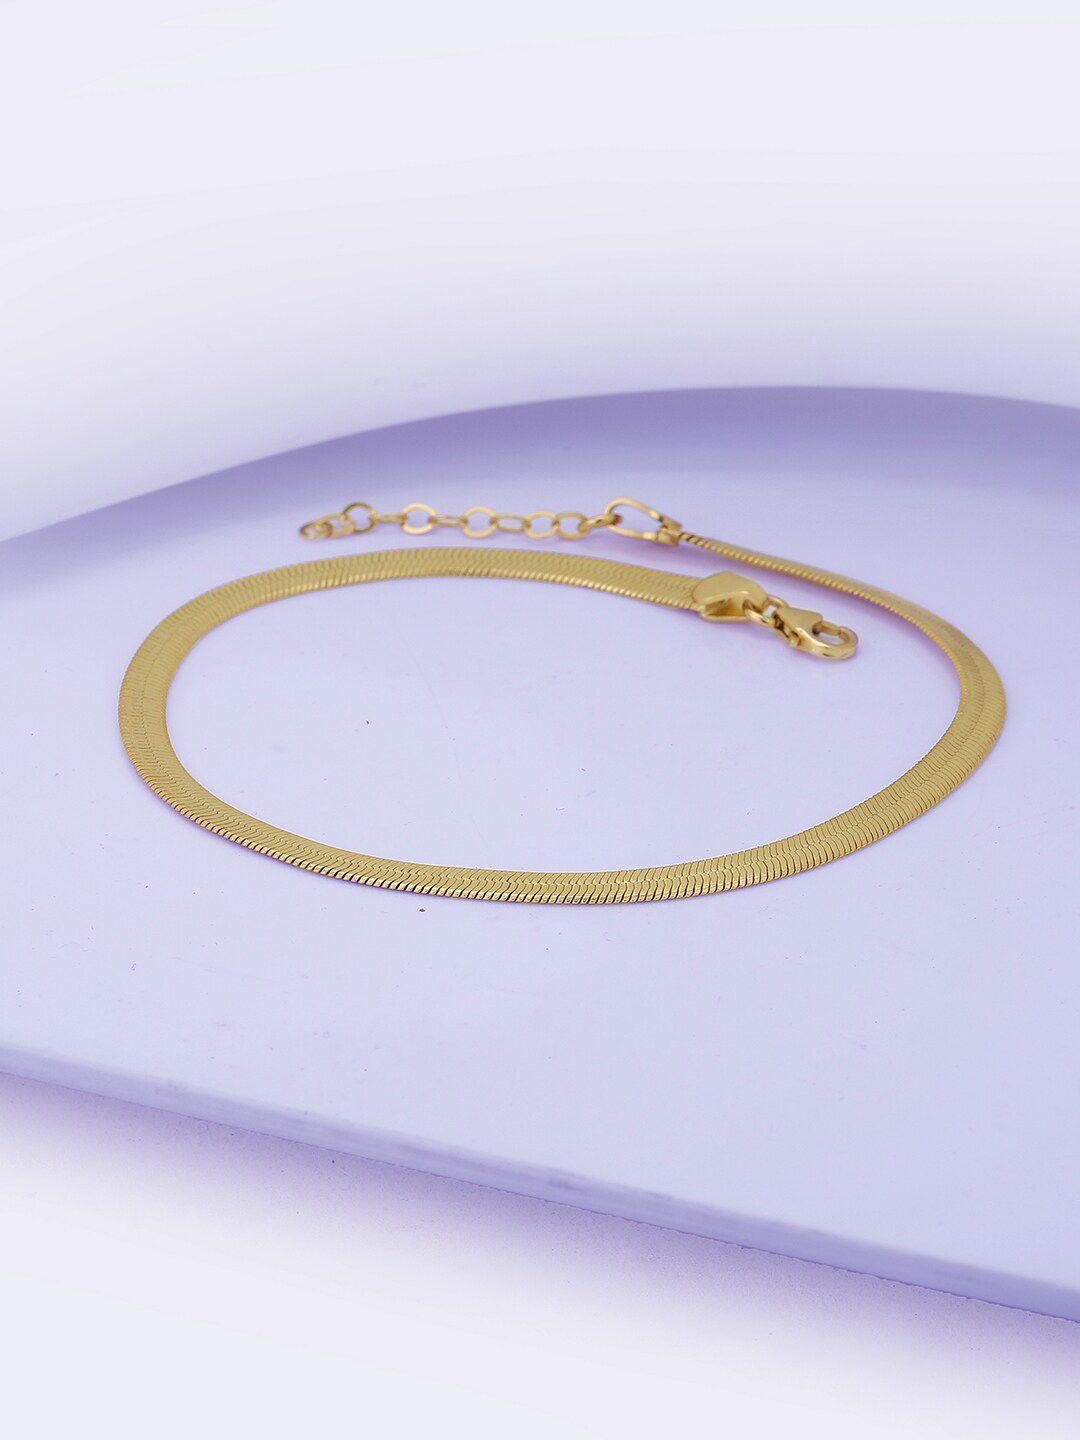 carlton london gold-plated anklet